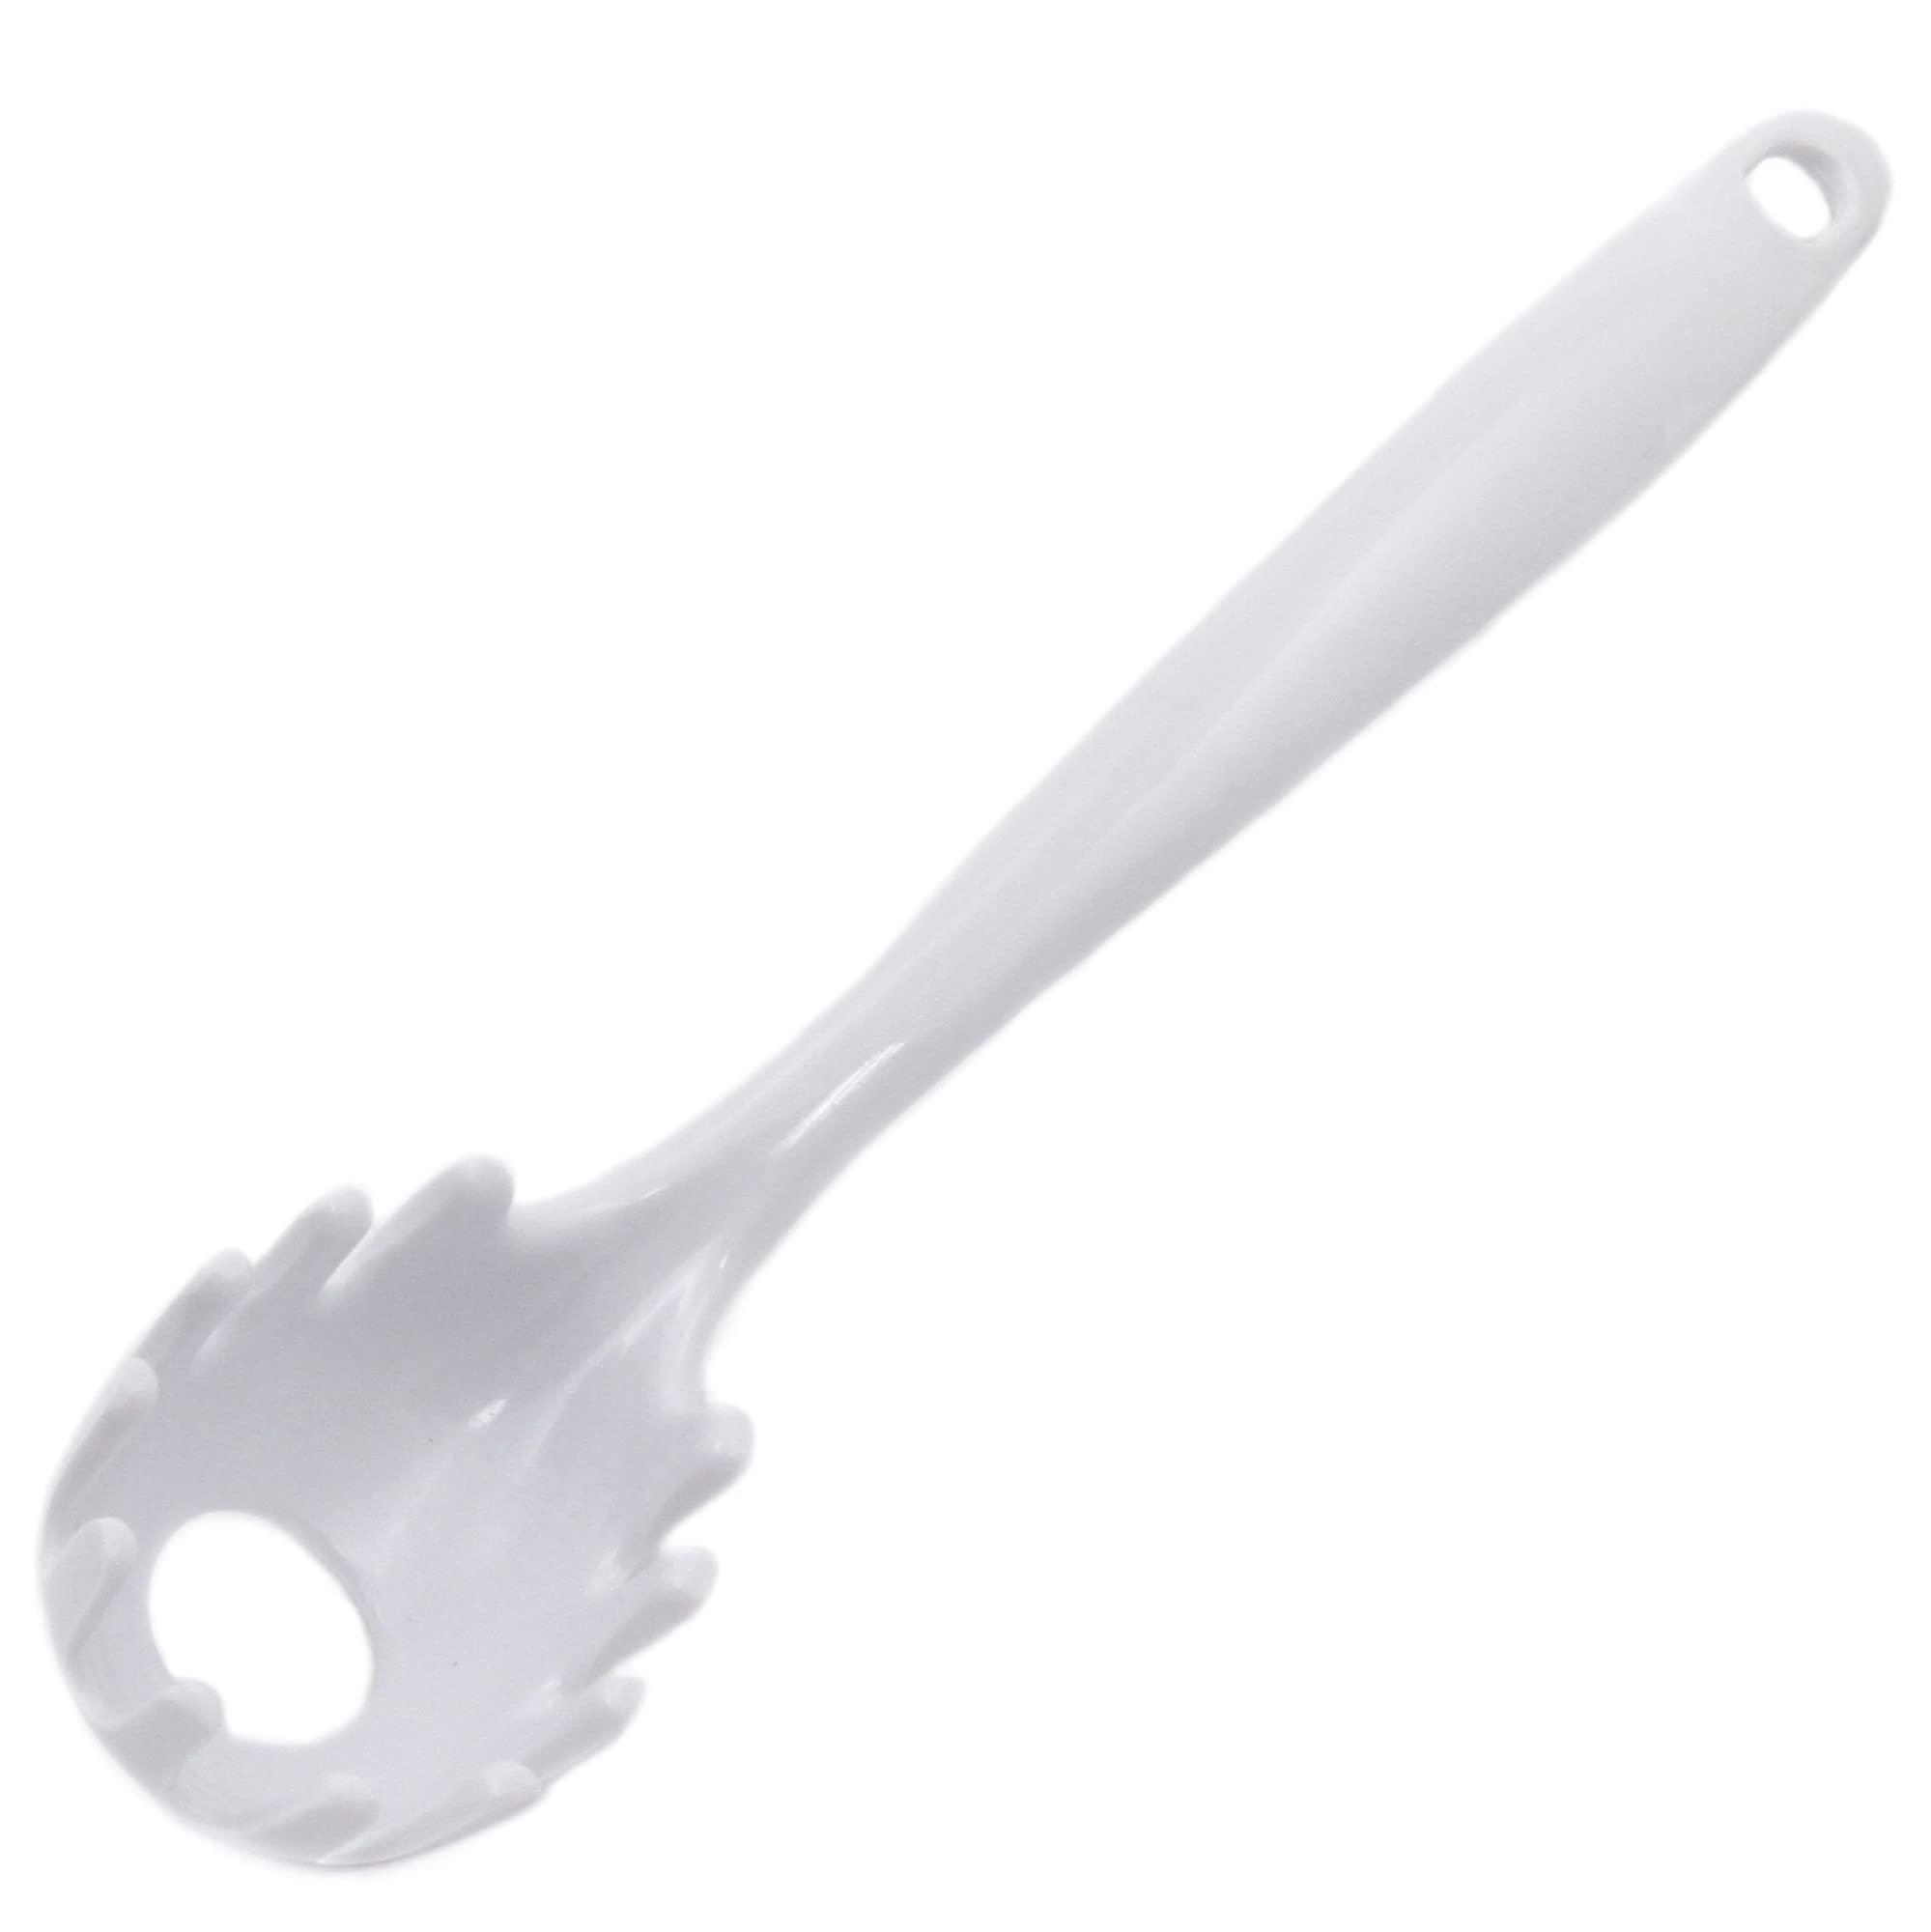 11" Chef Craft Melamine Spaghetti/Pasta Fork (White) $1.39 + Free Shipping w/ Prime or on orders over $35